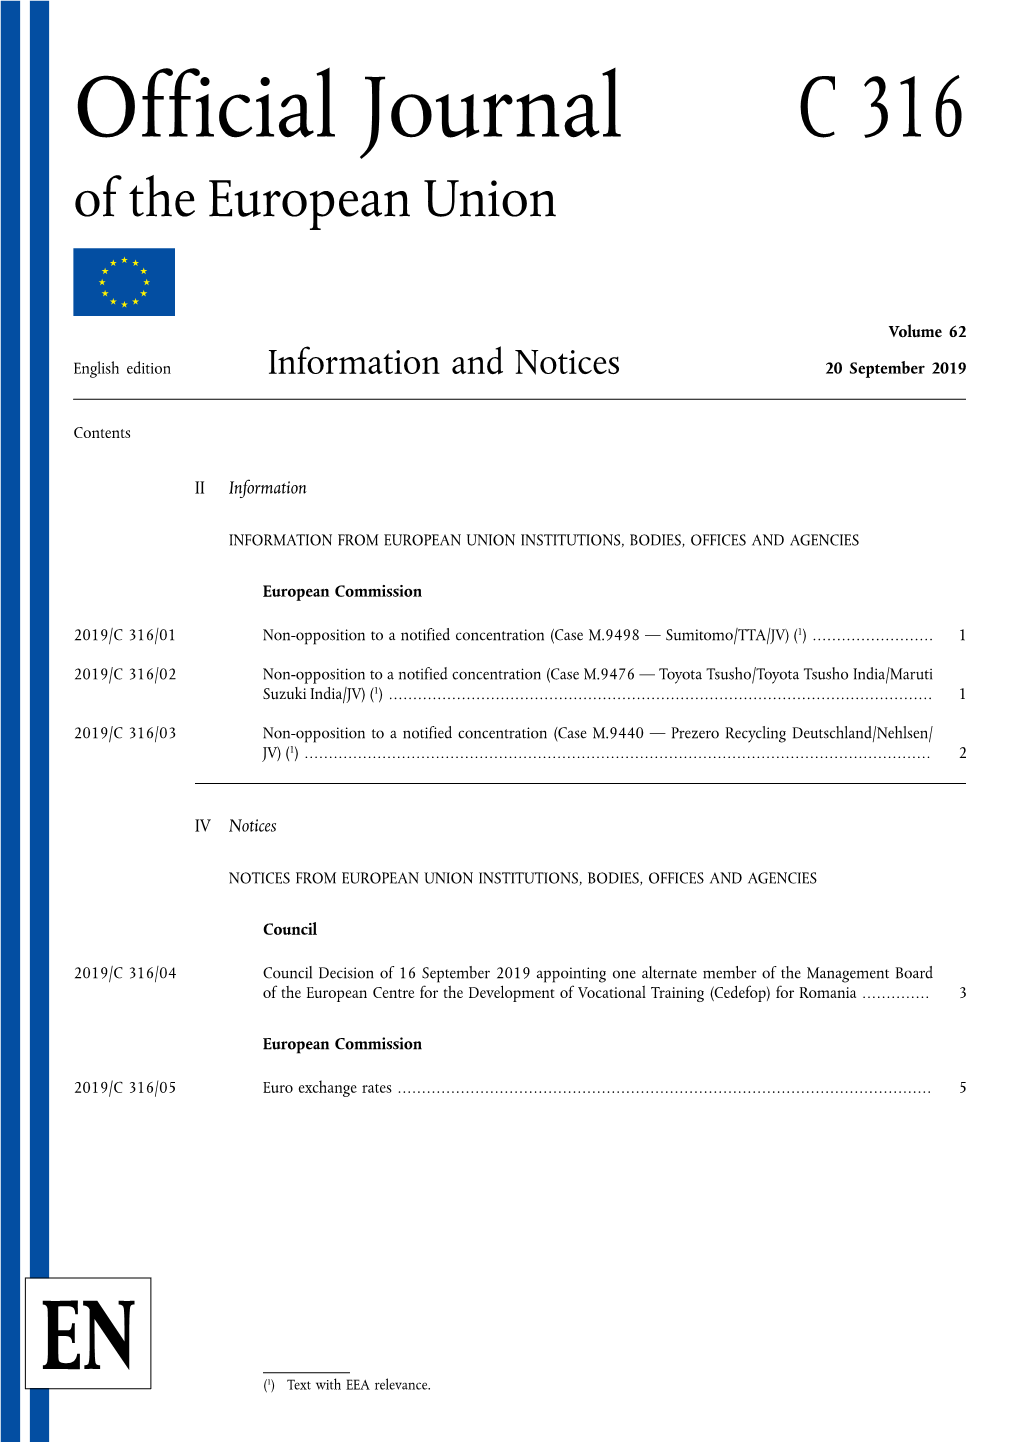 Official Journal C 316 of the European Union